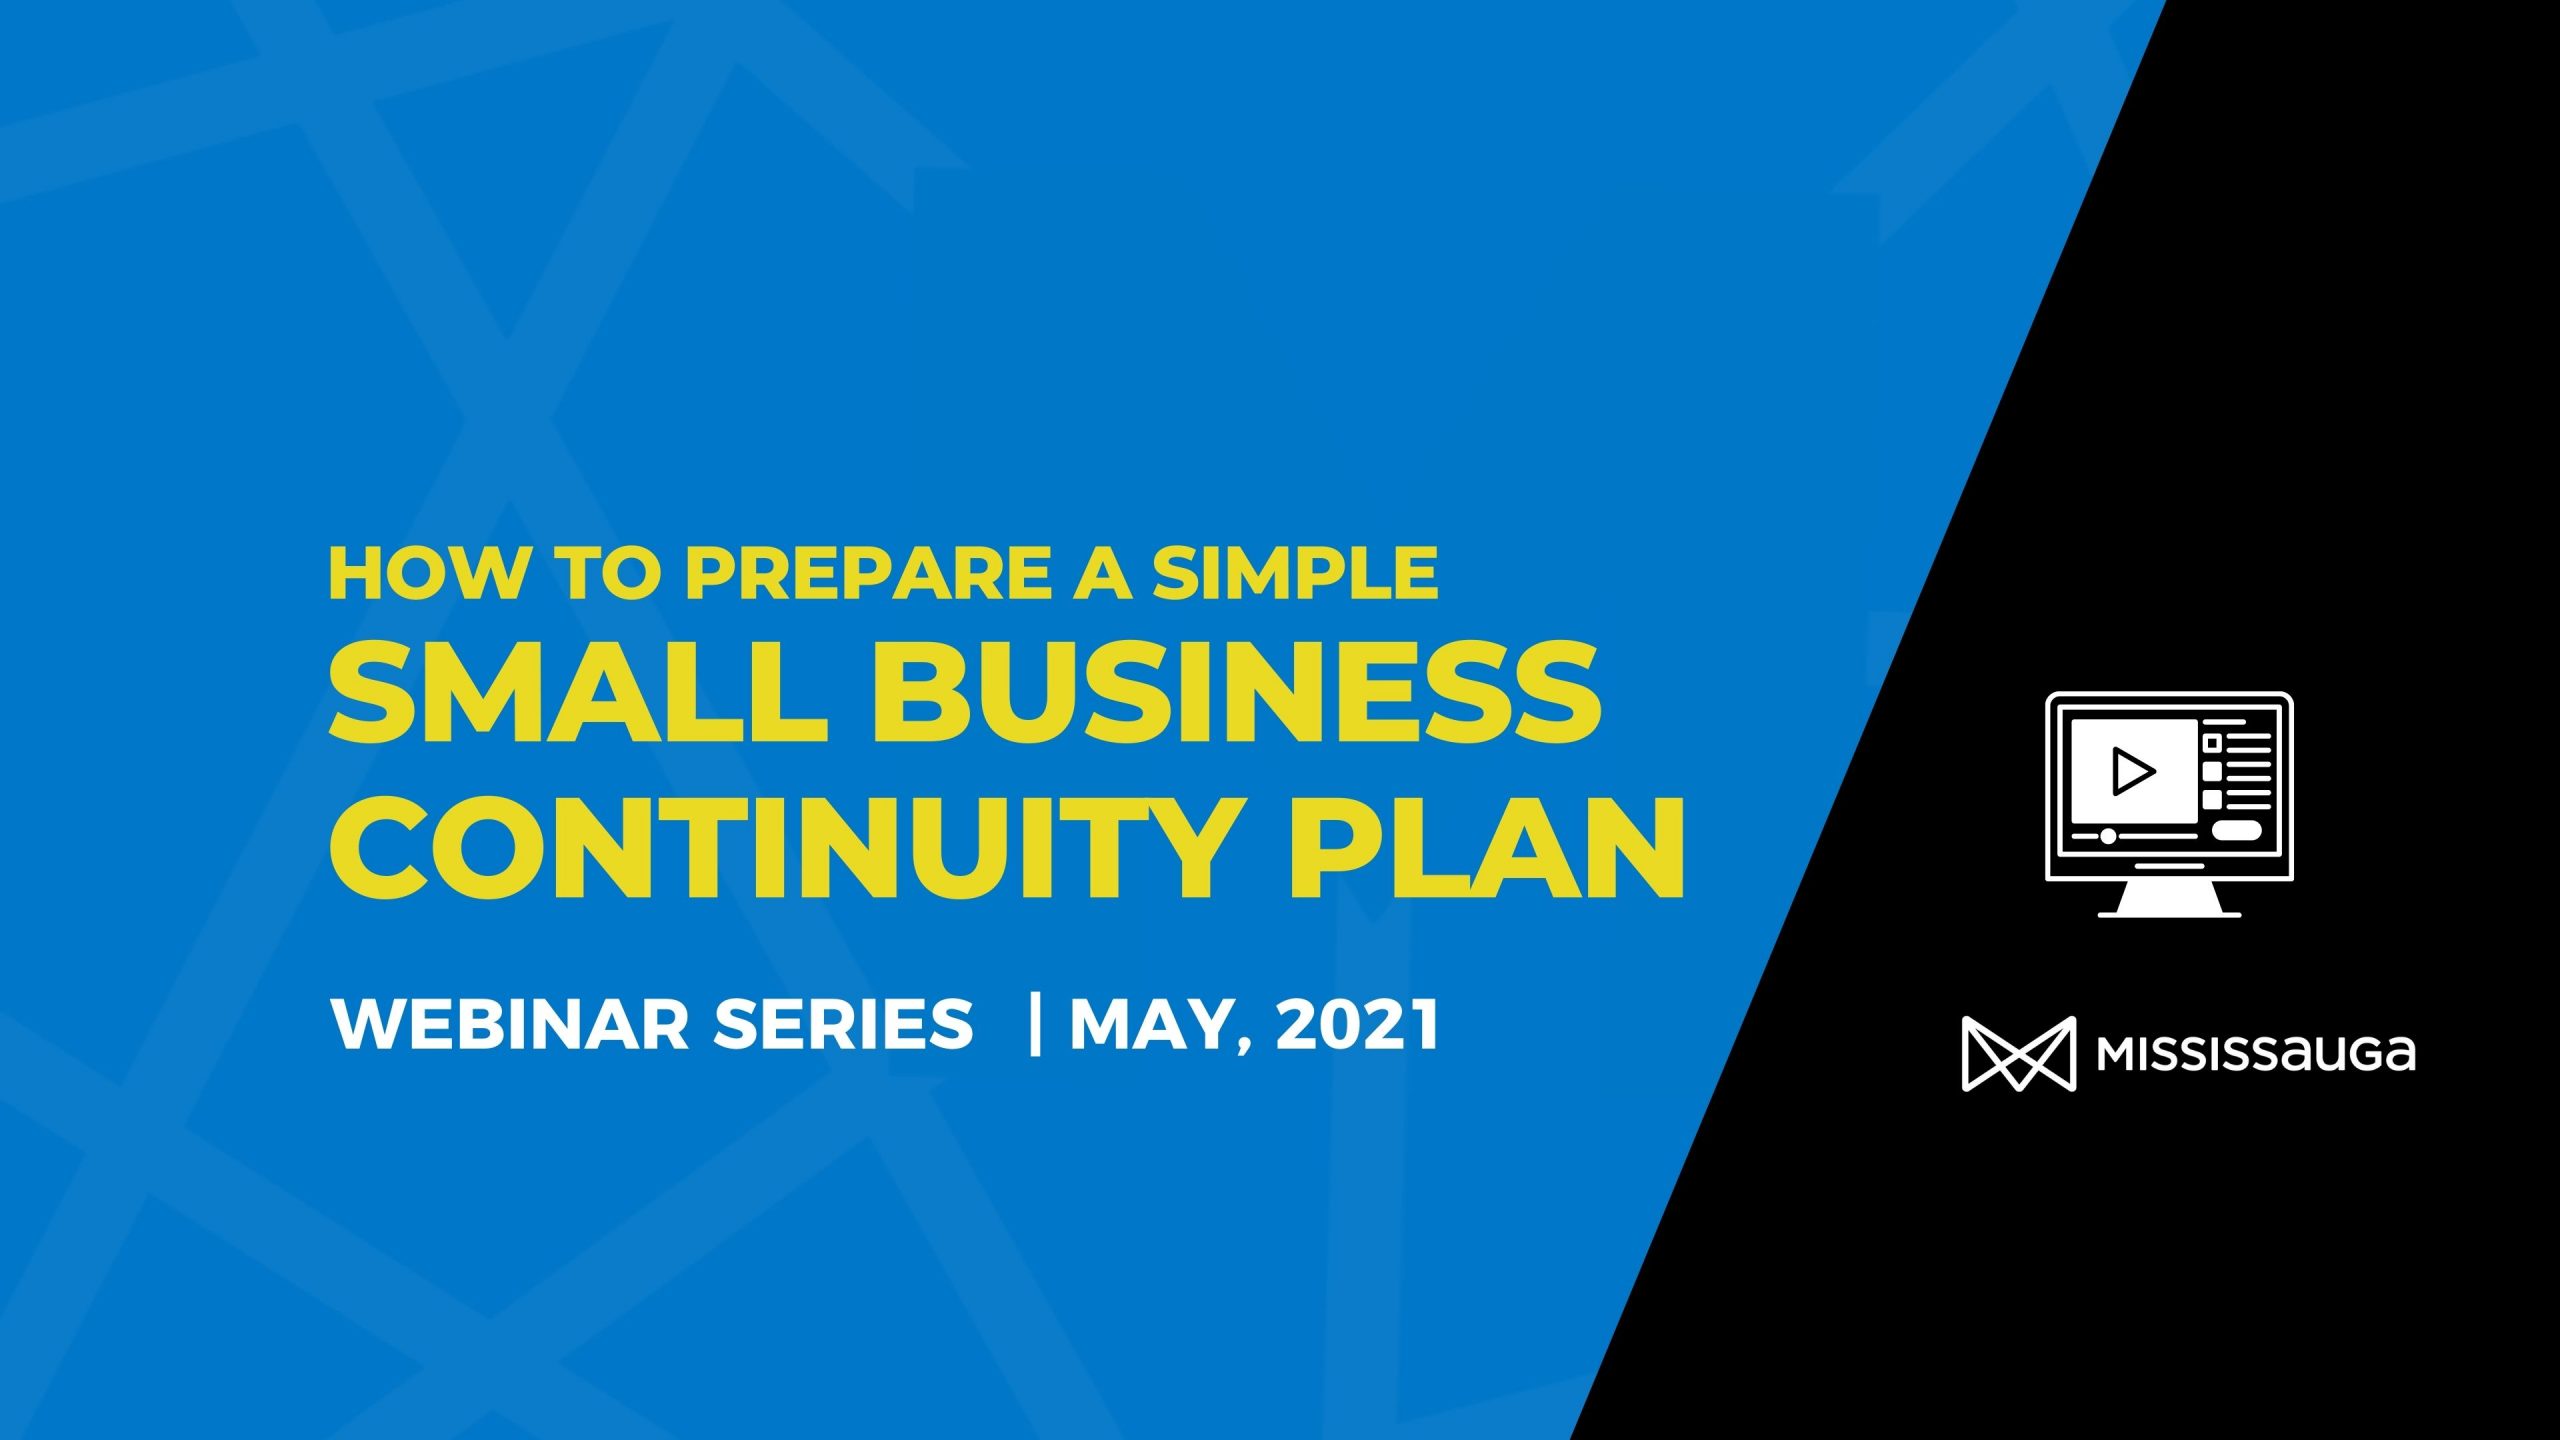 You are currently viewing How to Prepare a Small Business Continuity Plan – Webinar Series, May 2021